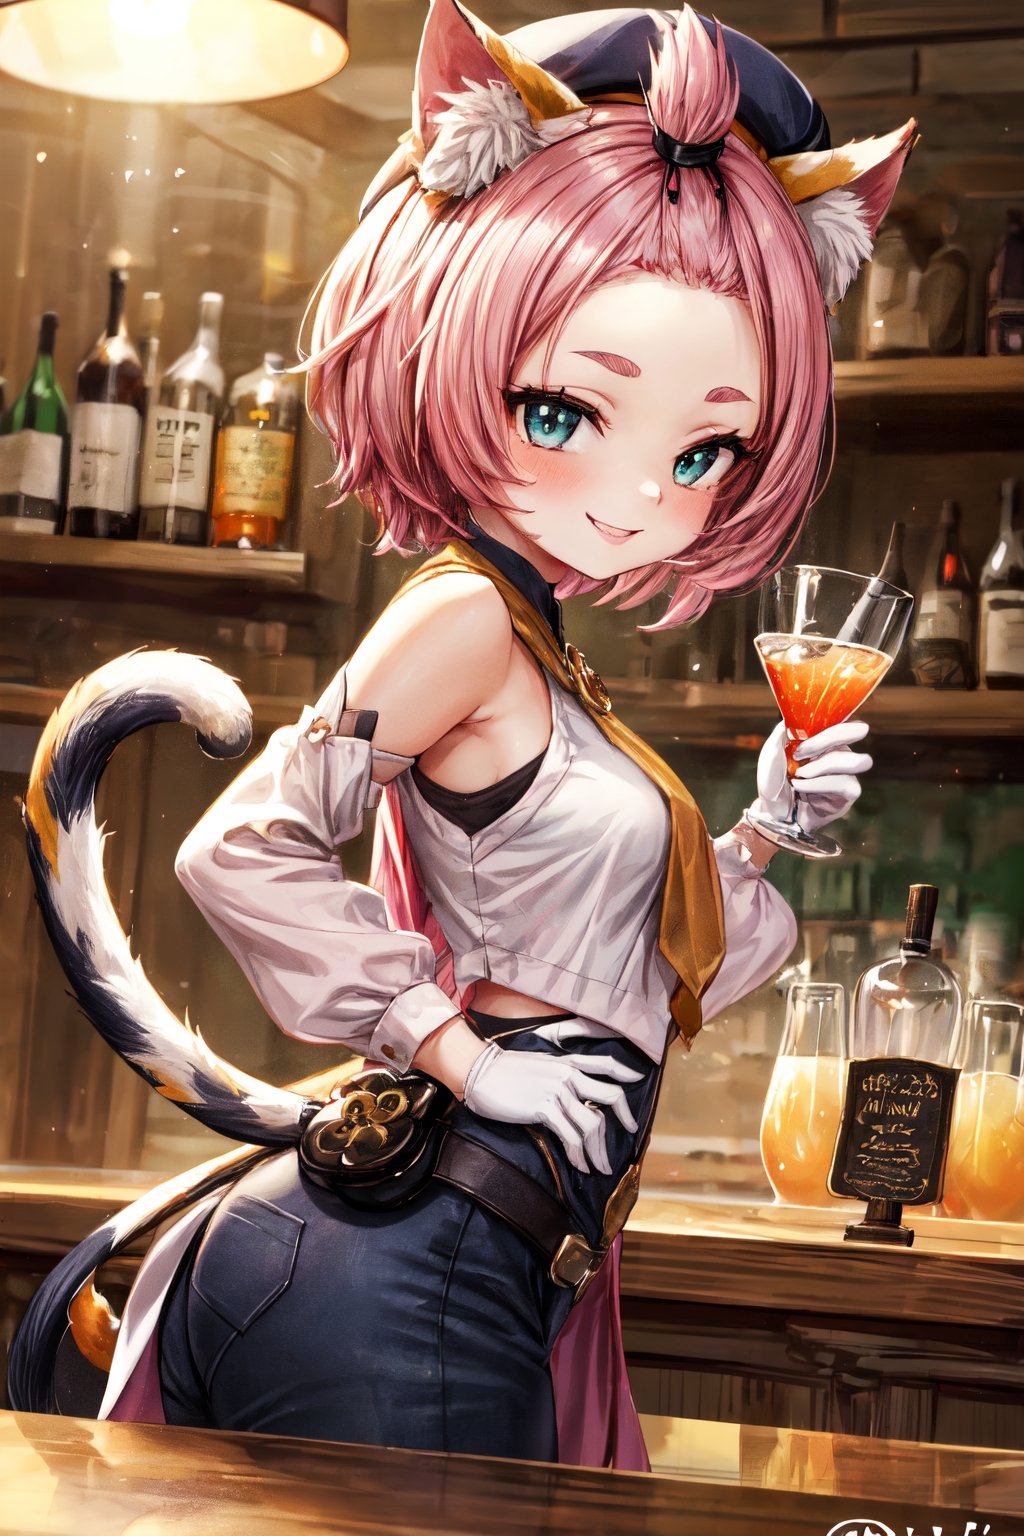 dionadef, is behind the counter, wearing her signature attire. With a mischievous smile on her face, Diona stands shaking a cocktail masterfully, her cat ears perked up attentively as she mixes the ingredients with precision. Her furry tail swishes gently from side to side with grace. The tavern patrons watch in admiration as Diona demonstrates her bartending skills, and some even giggle with delight at her playful charm. It's a lovely, lively scene that captures Diona's vivacious personality in her natural environment.